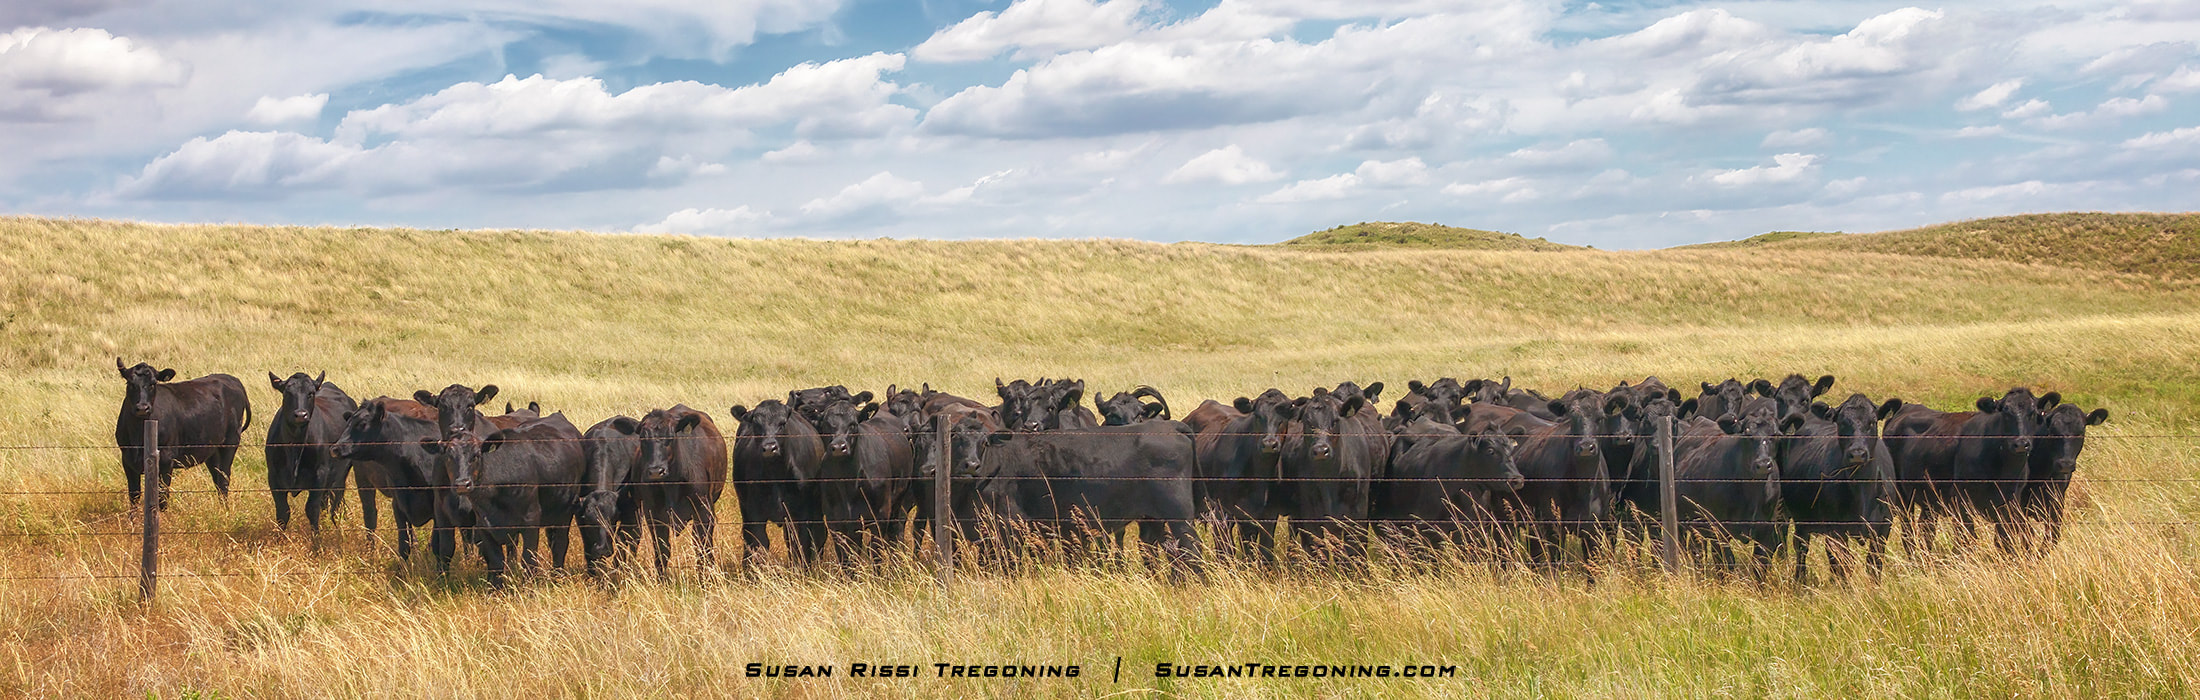 You never can trust animals to do what you expect them to do!<BR><BR> We pulled off to the side of the road so I could photograph this herd of cattle scattered in the distance through the beautiful rolling Nebraska Sandhills. They all looked up simultaneously, thought, “ friend,” and came to greet me at the fence. Unfortunately, I didn’t get the shot I envisioned, and they were unhappy with me when I left. I heard their snorts of indignation! <BR><BR> My husband thought the entire thing was hysterically funny as he watched from the SUV.